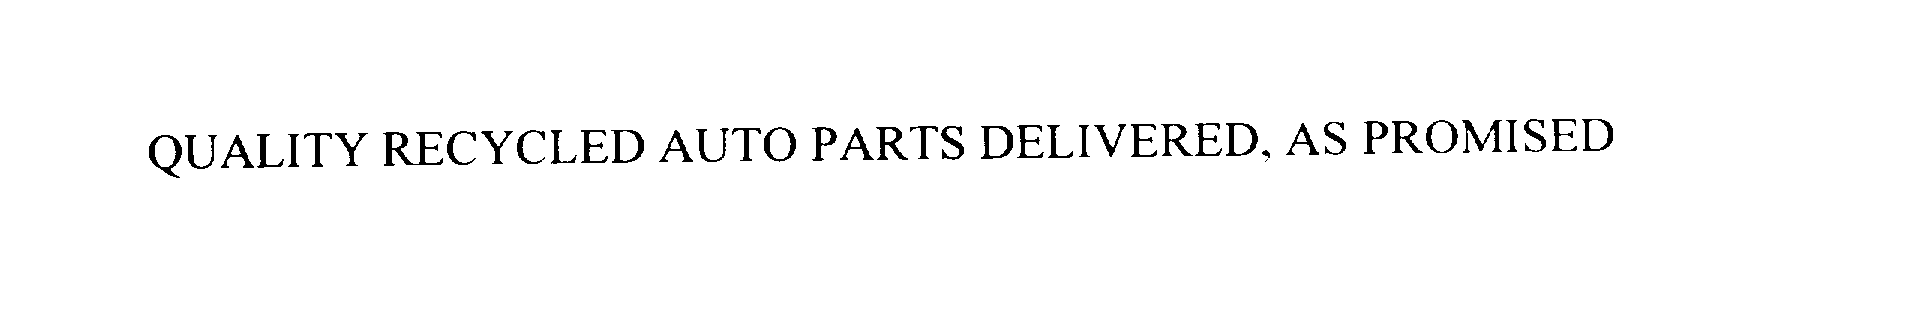 Trademark Logo QUALITY RECYCLED AUTO PARTS DELIVERED, AS PROMISED